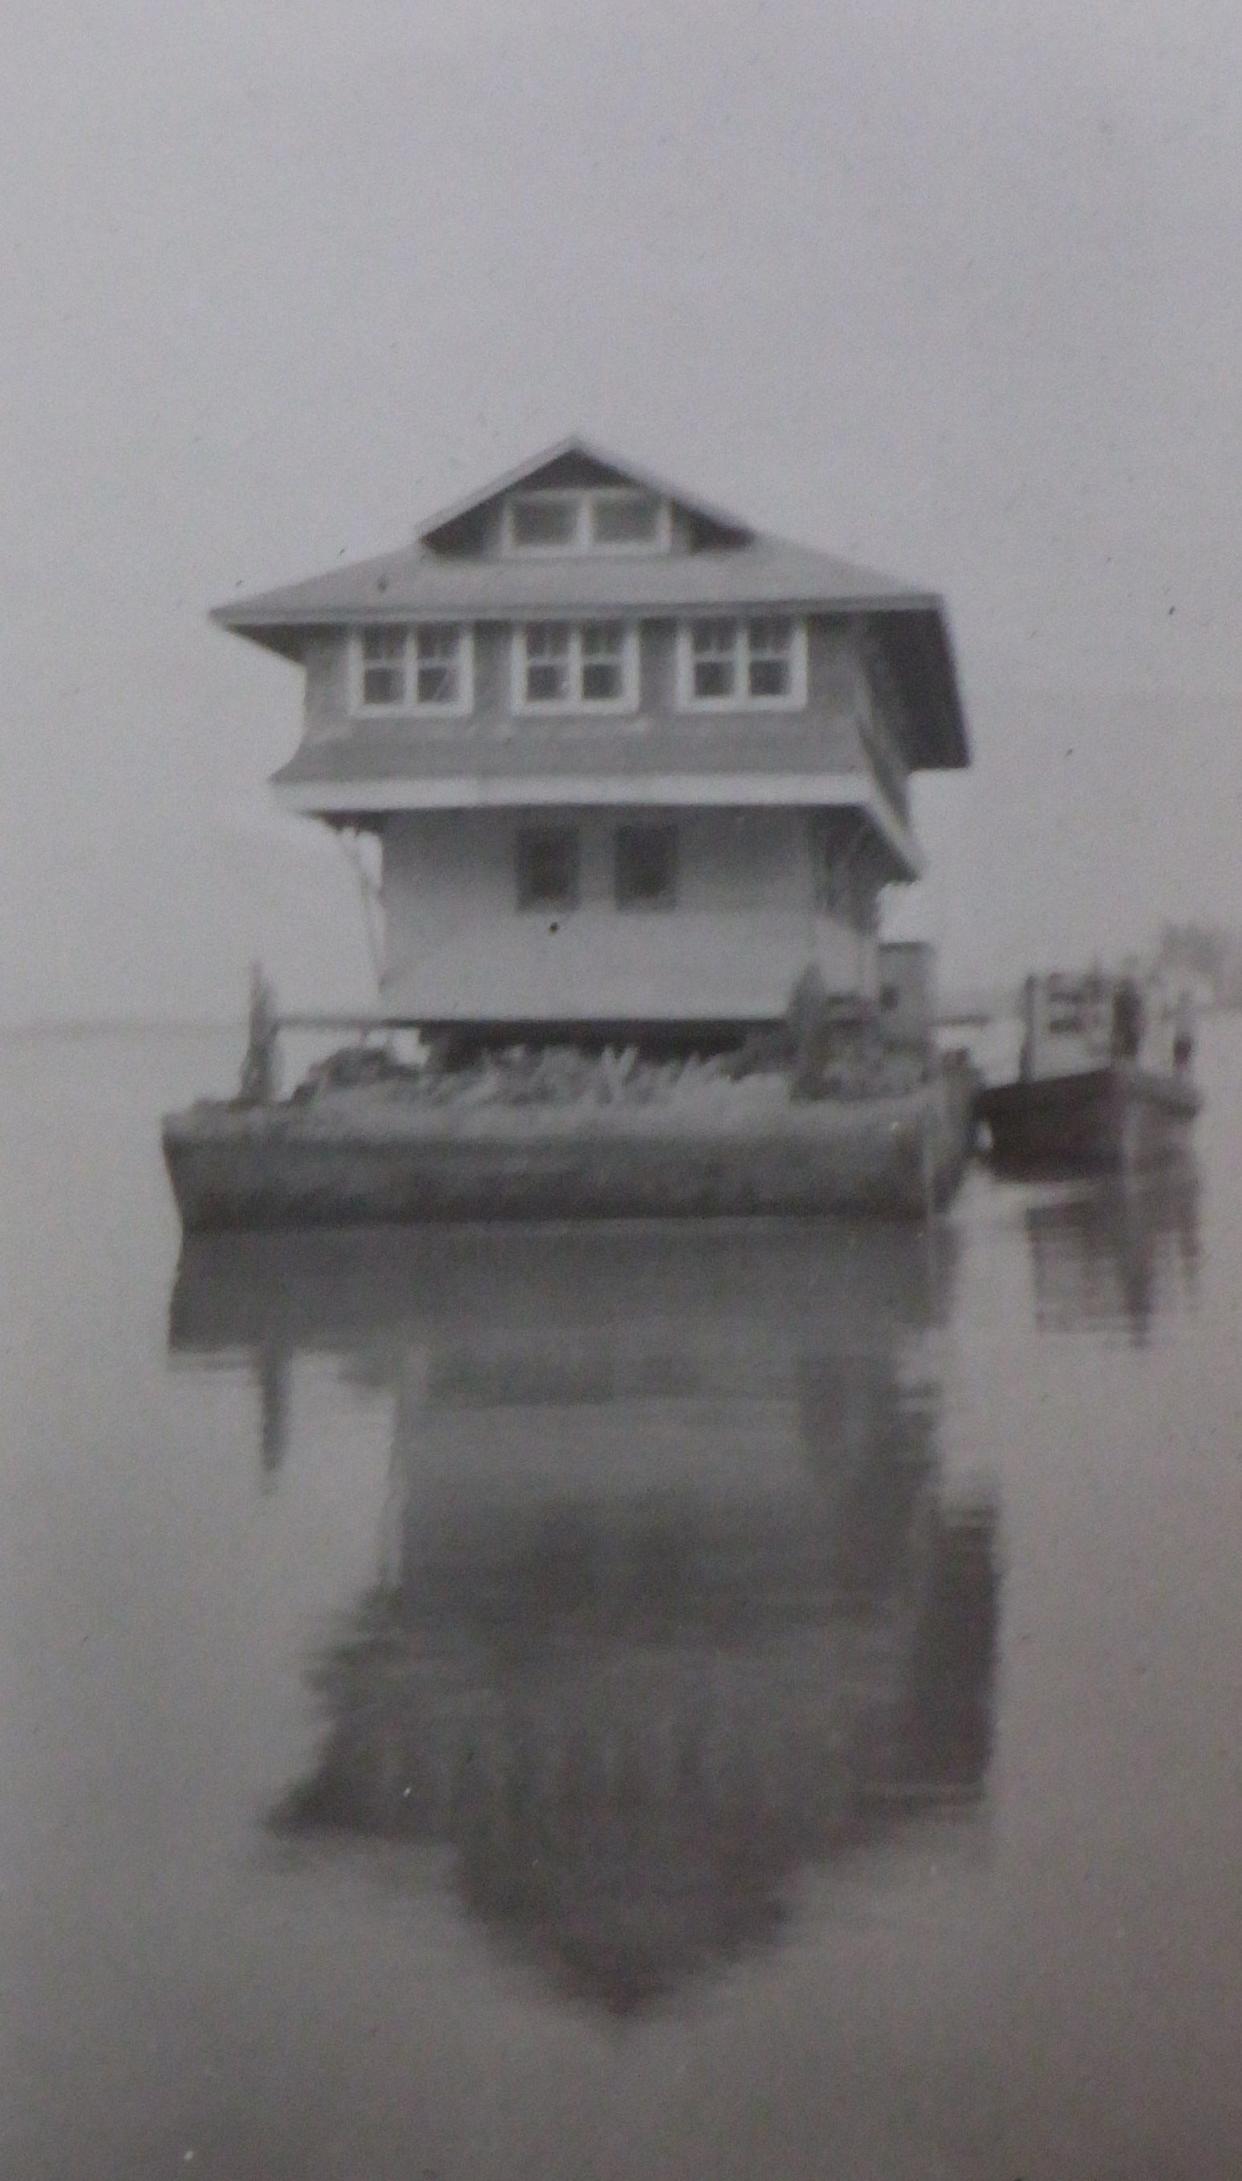 The 7-Up Houseboat.